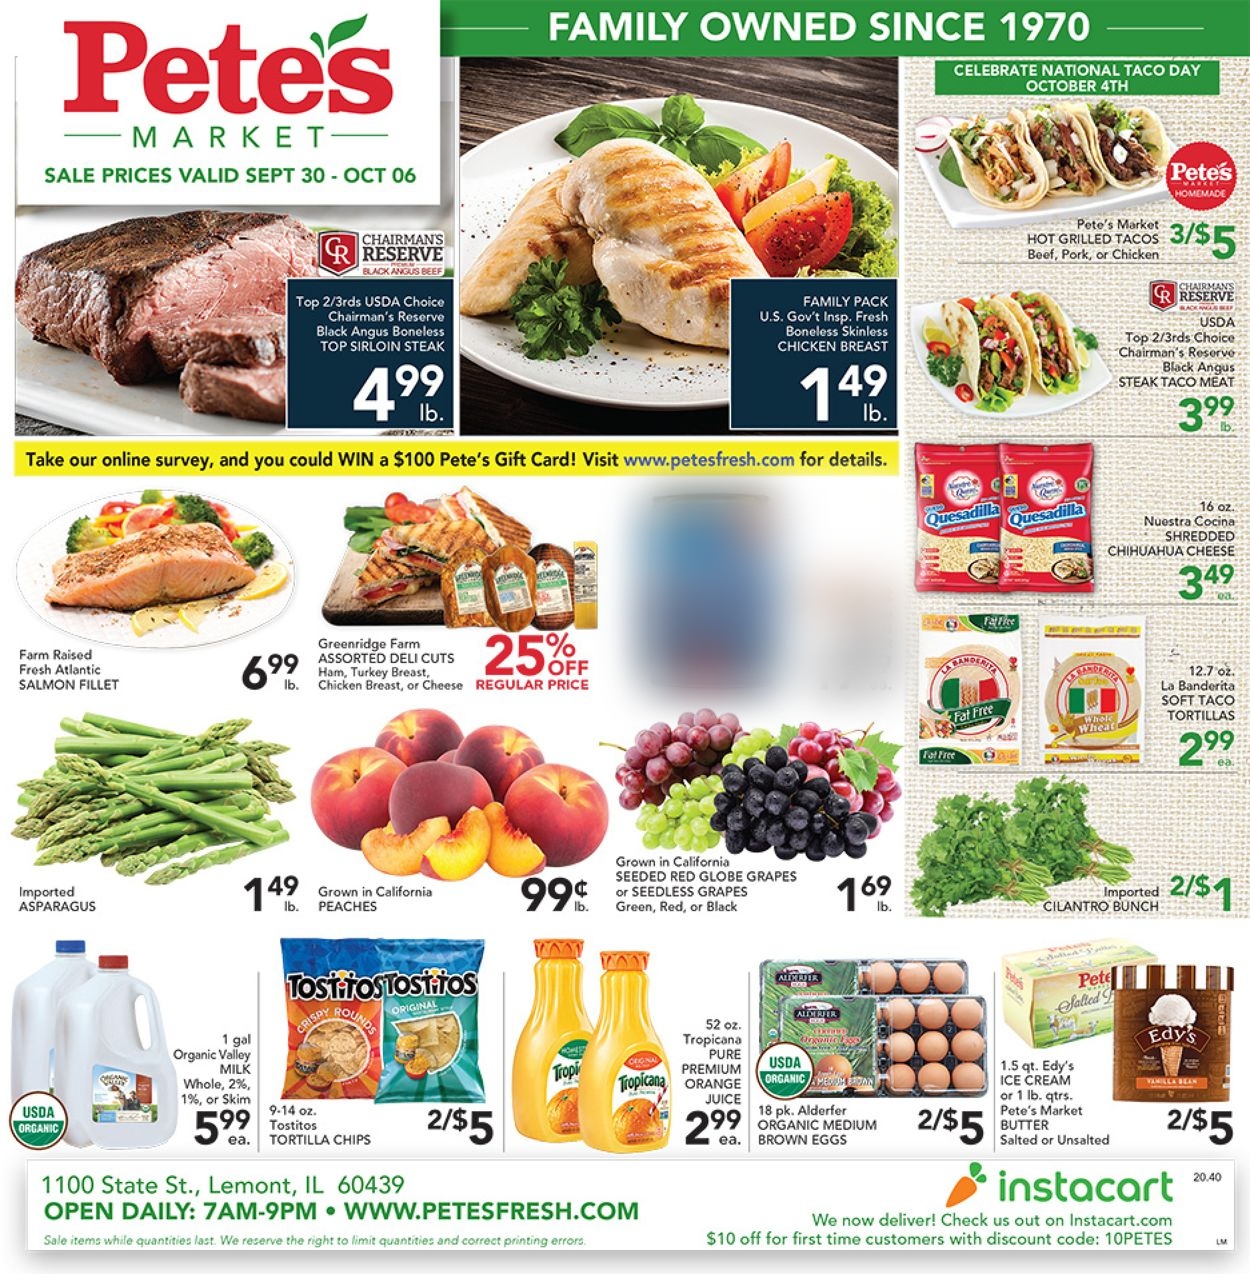 Pete's Fresh Market Current weekly ad 09/30 - 10/06/2020 ...